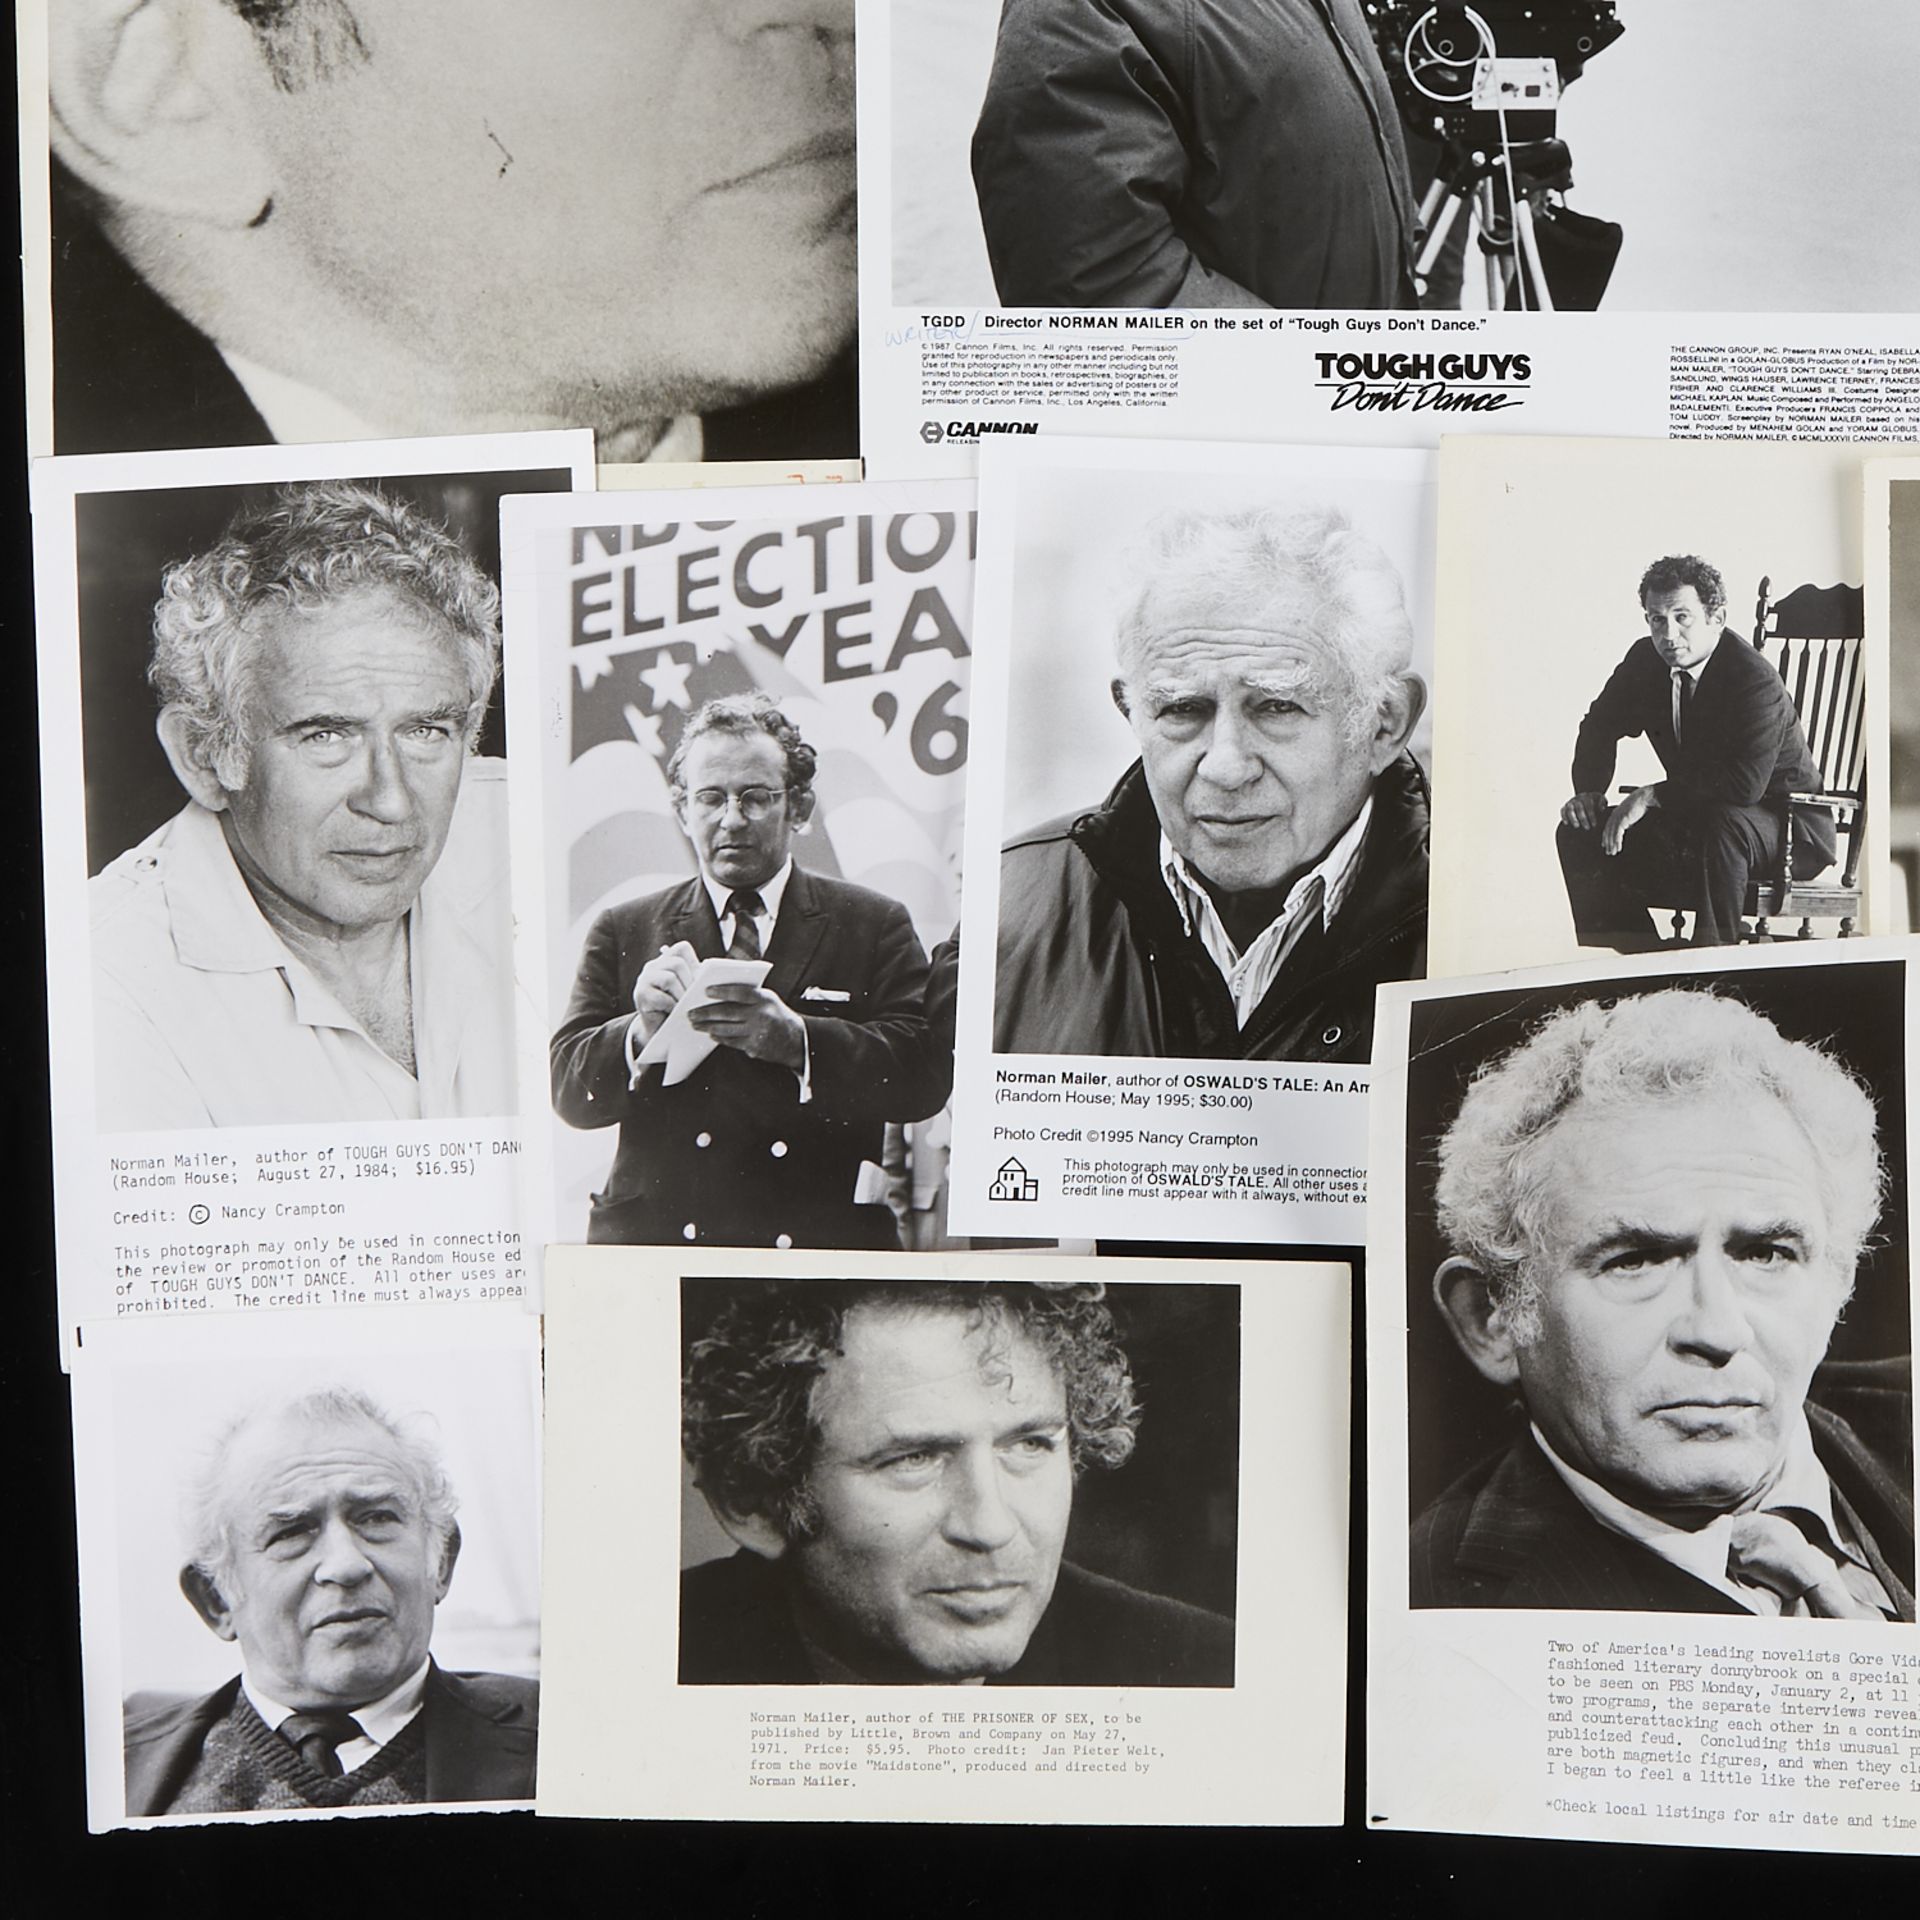 24 Norman Mailer Photos from Star Tribune Archives - Image 4 of 10